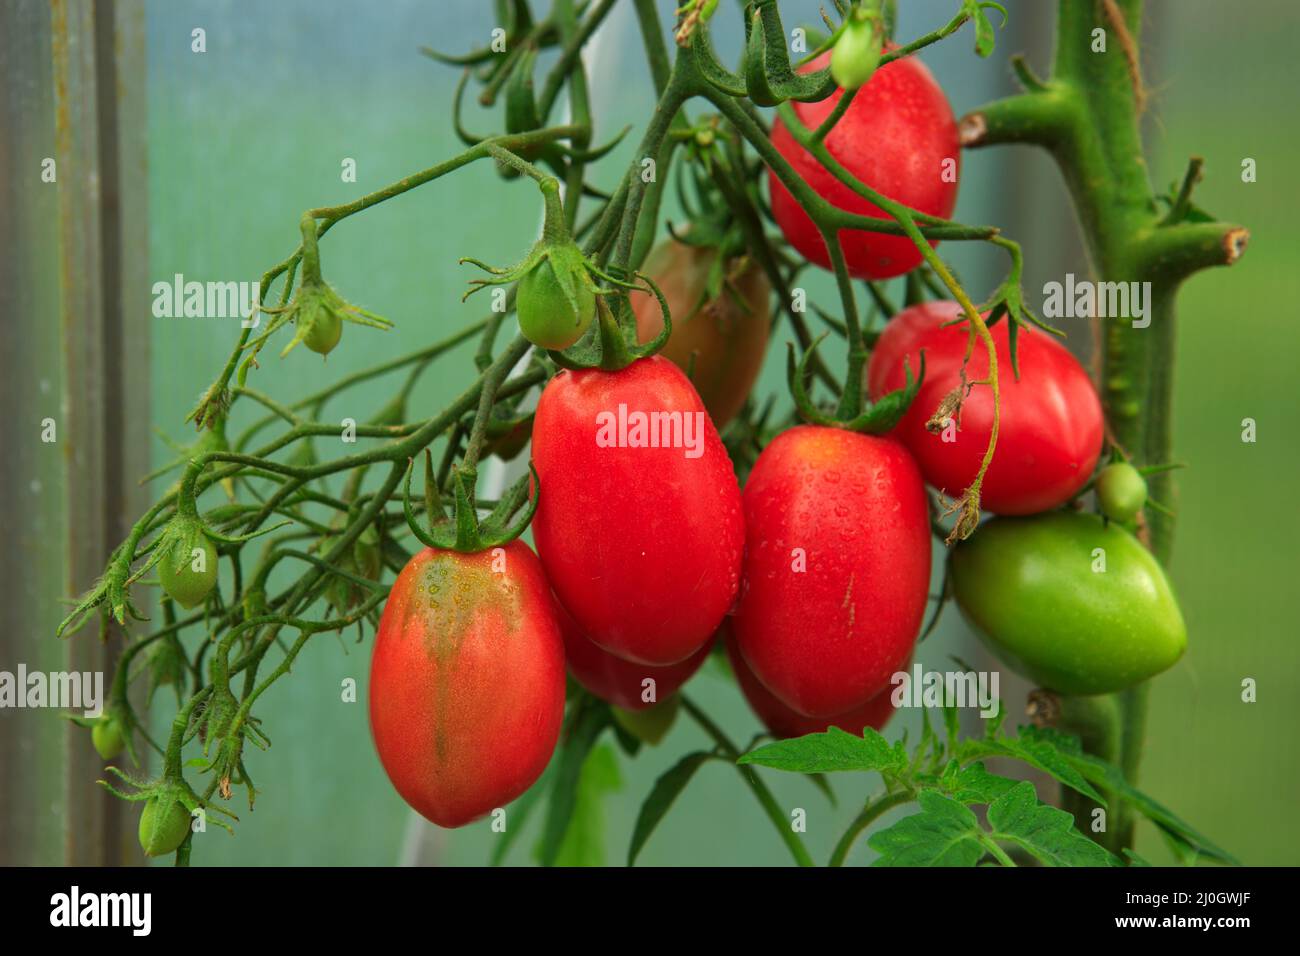 Growth ripe pepper tomatoes in greenhouse. Stock Photo